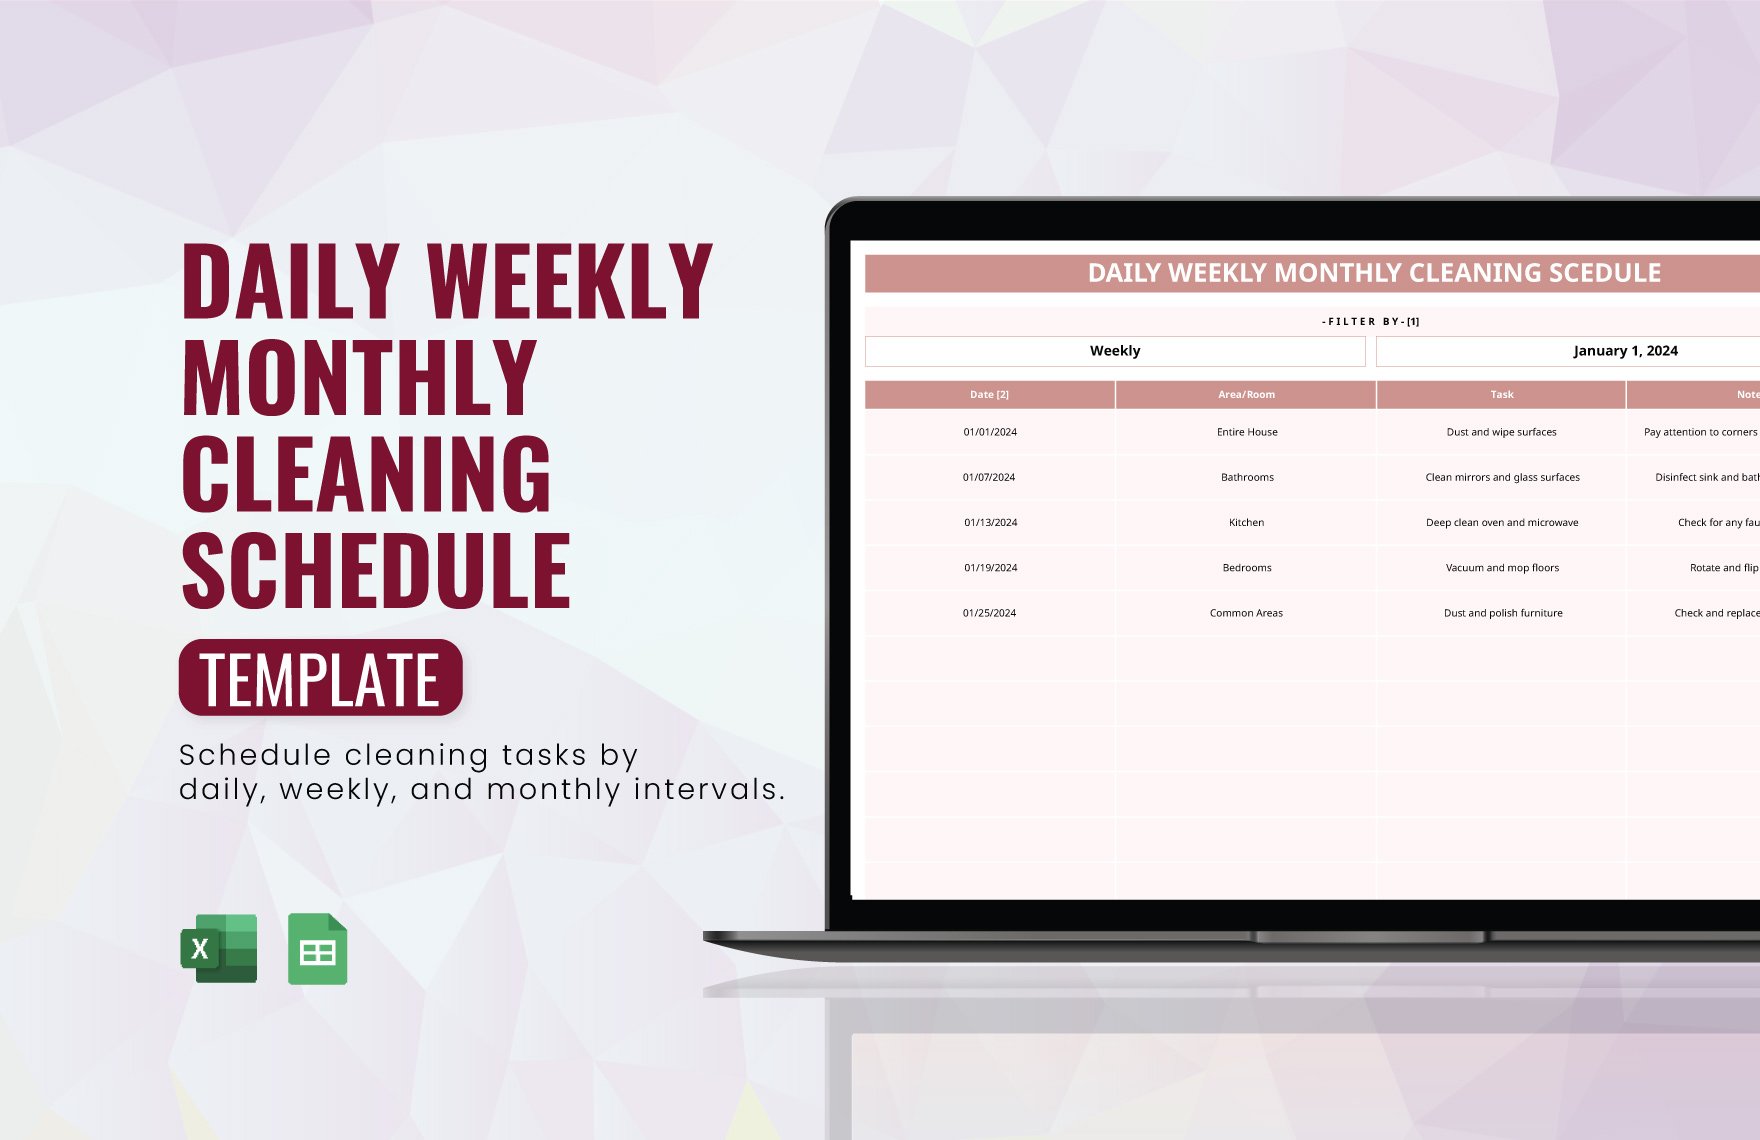 Daily Weekly Monthly Cleaning Schedule Template in Excel, Google Sheets